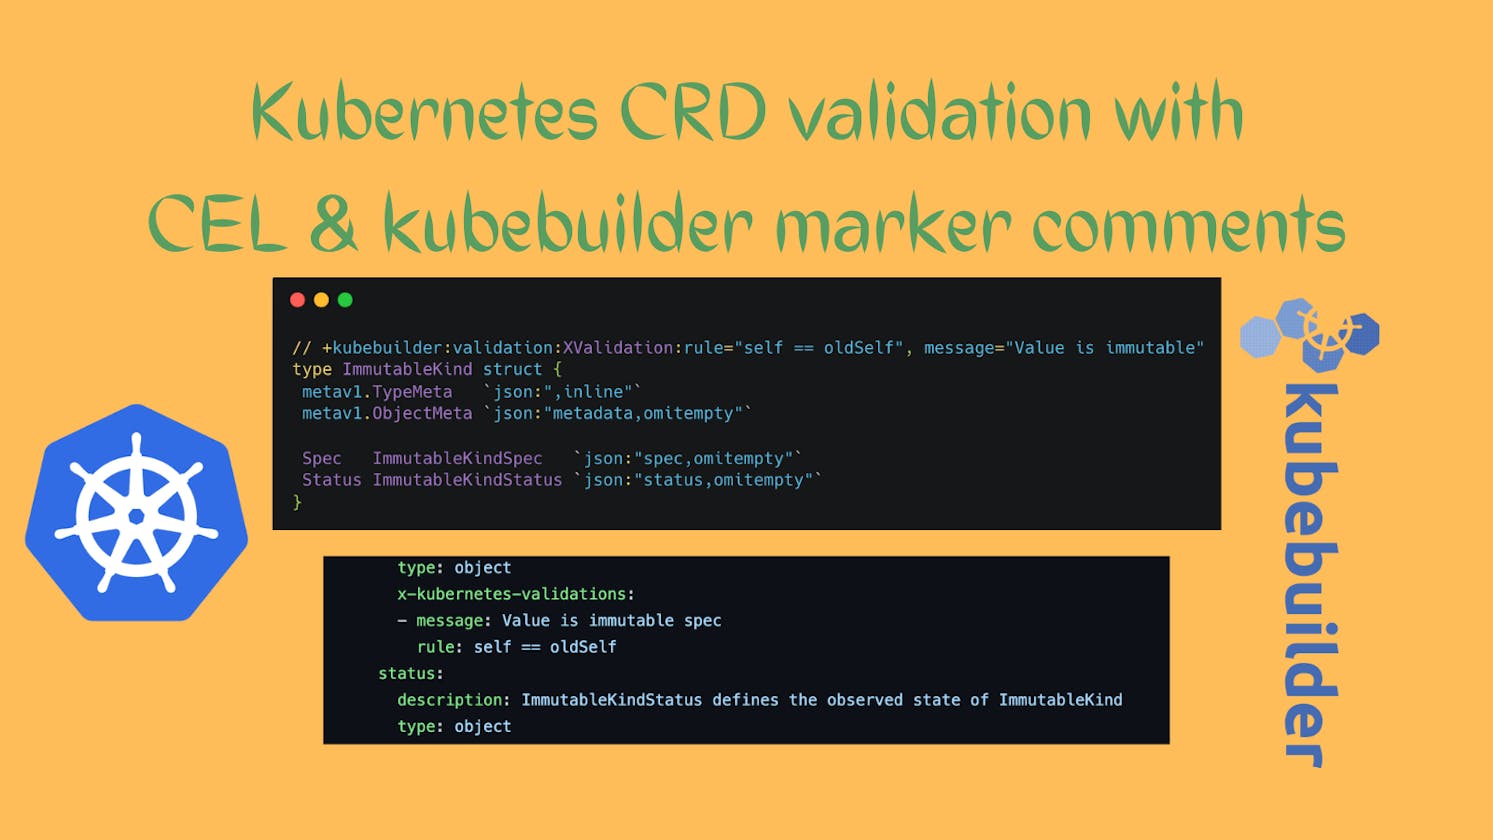 Kubernetes CRD validation with CEL and kubebuilder marker comments